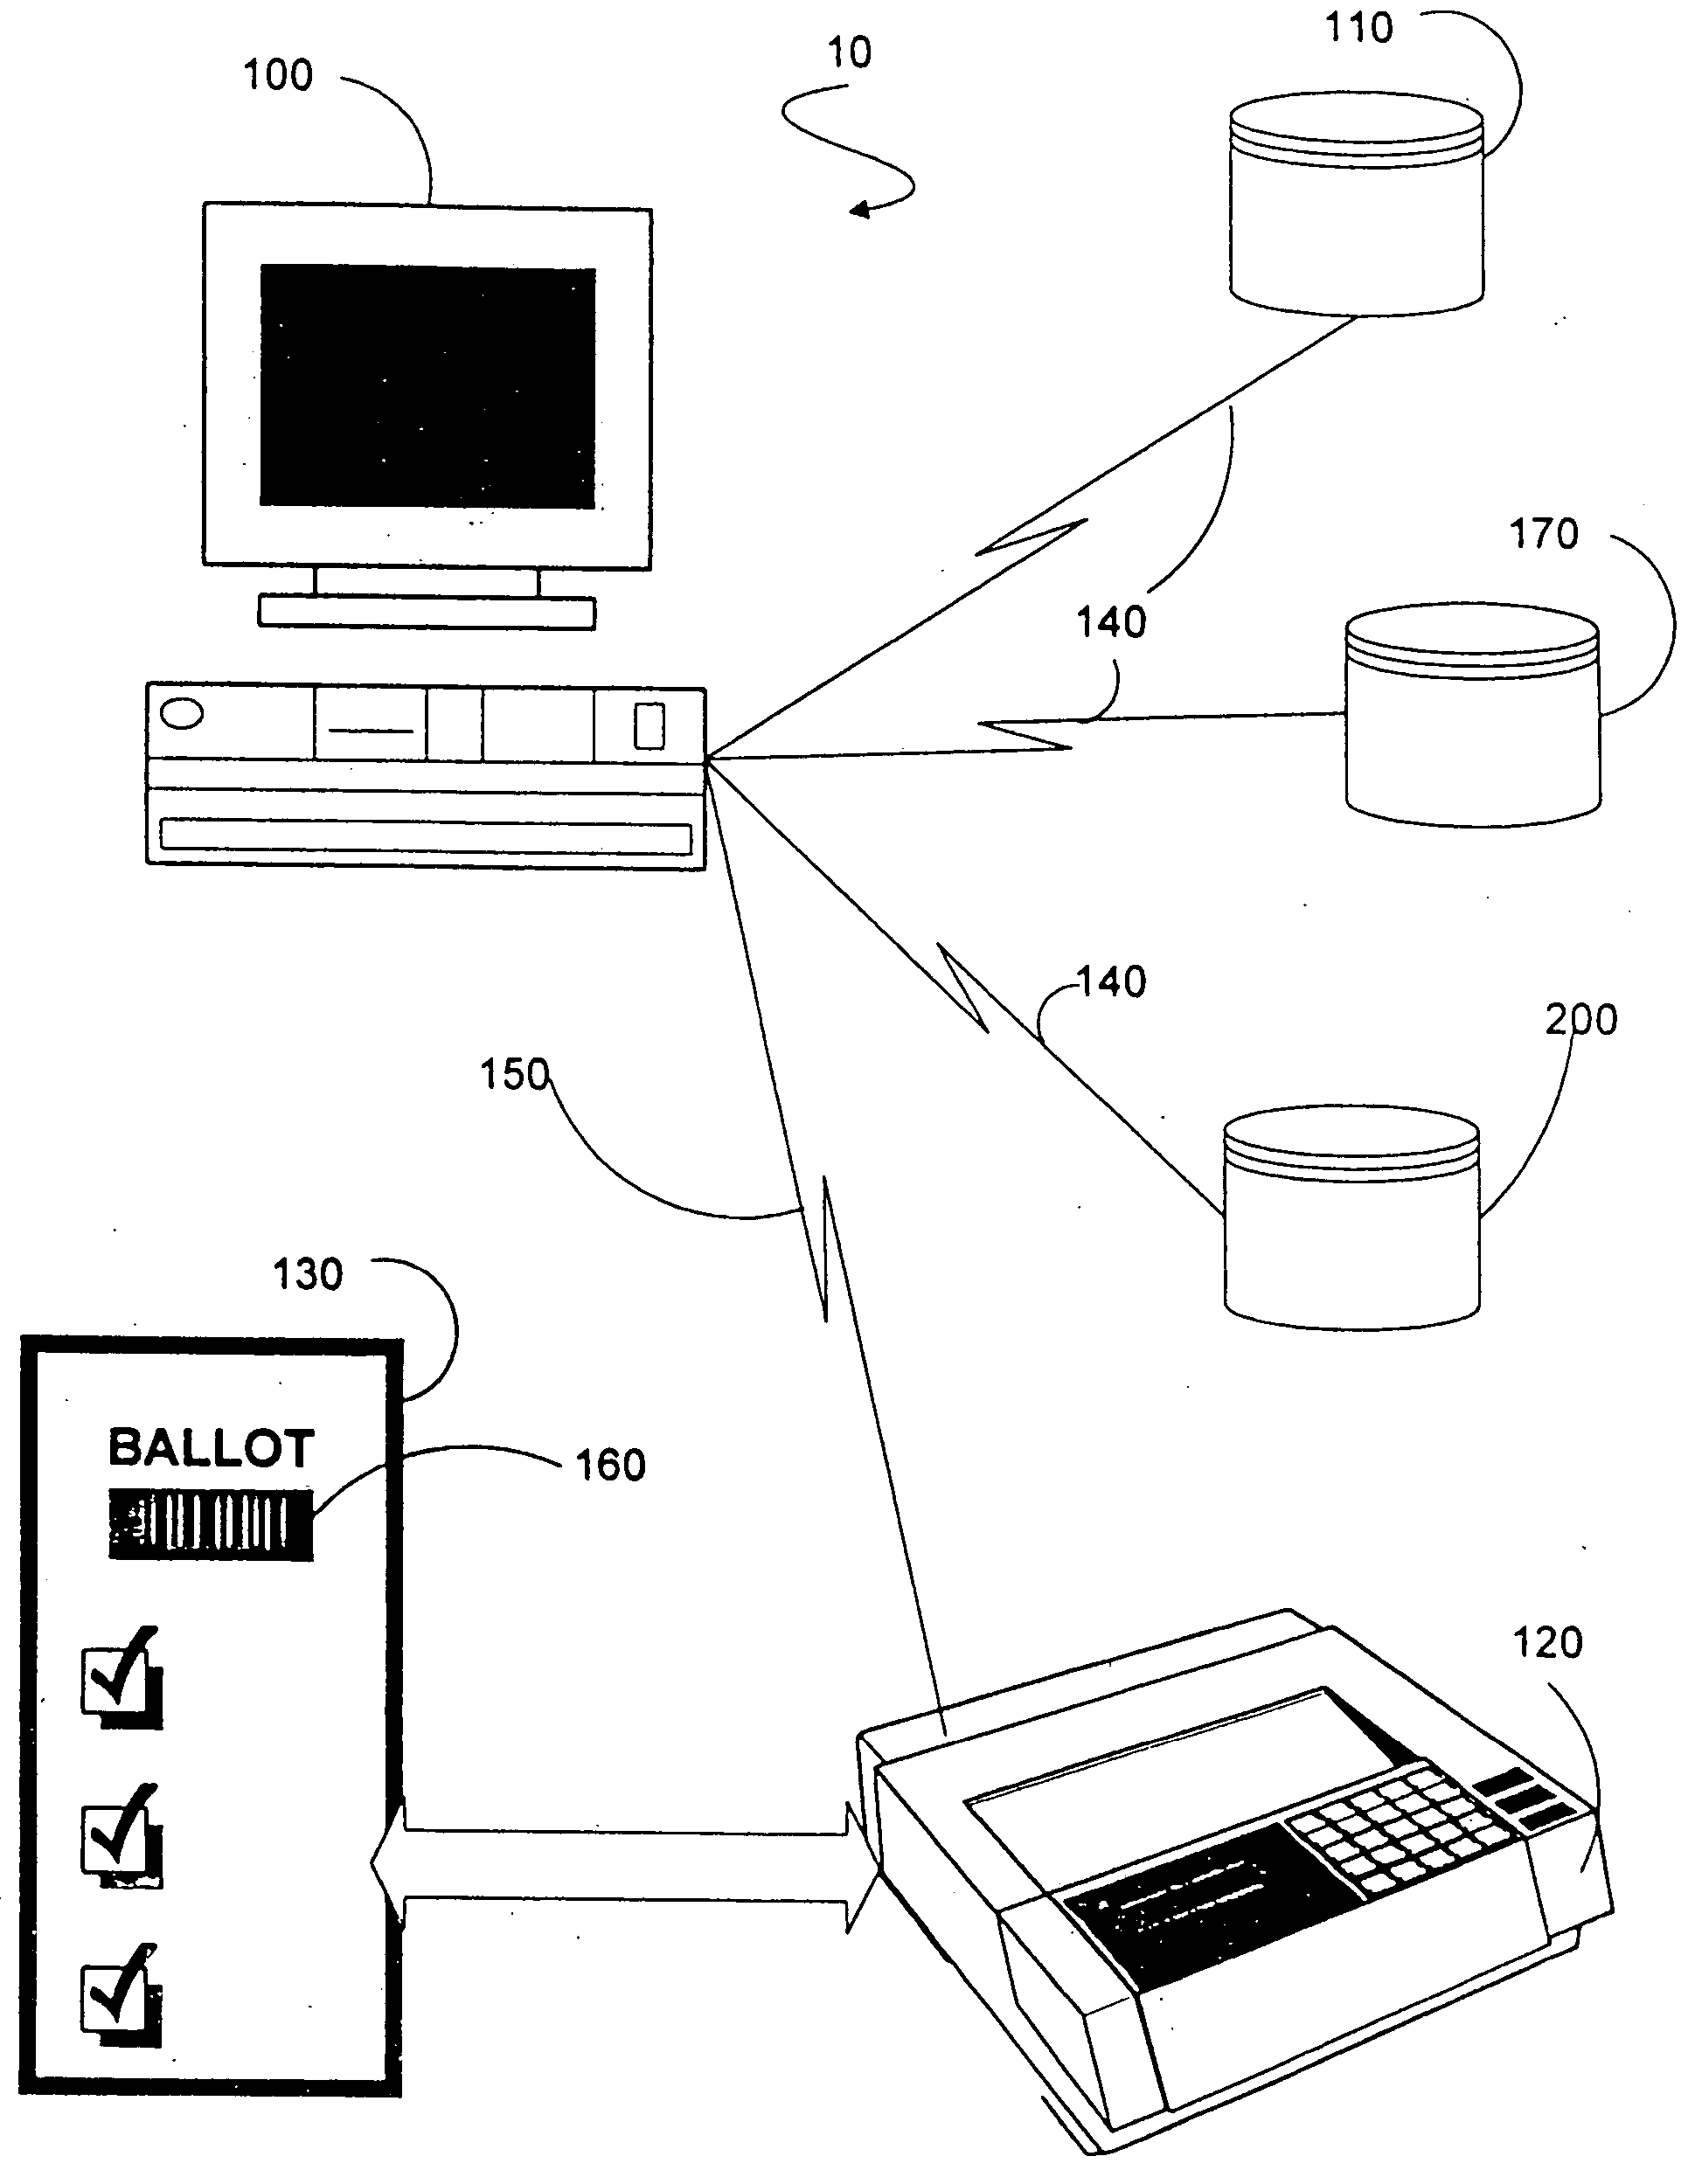 Voting system and method for secure voting with increased voter confidence